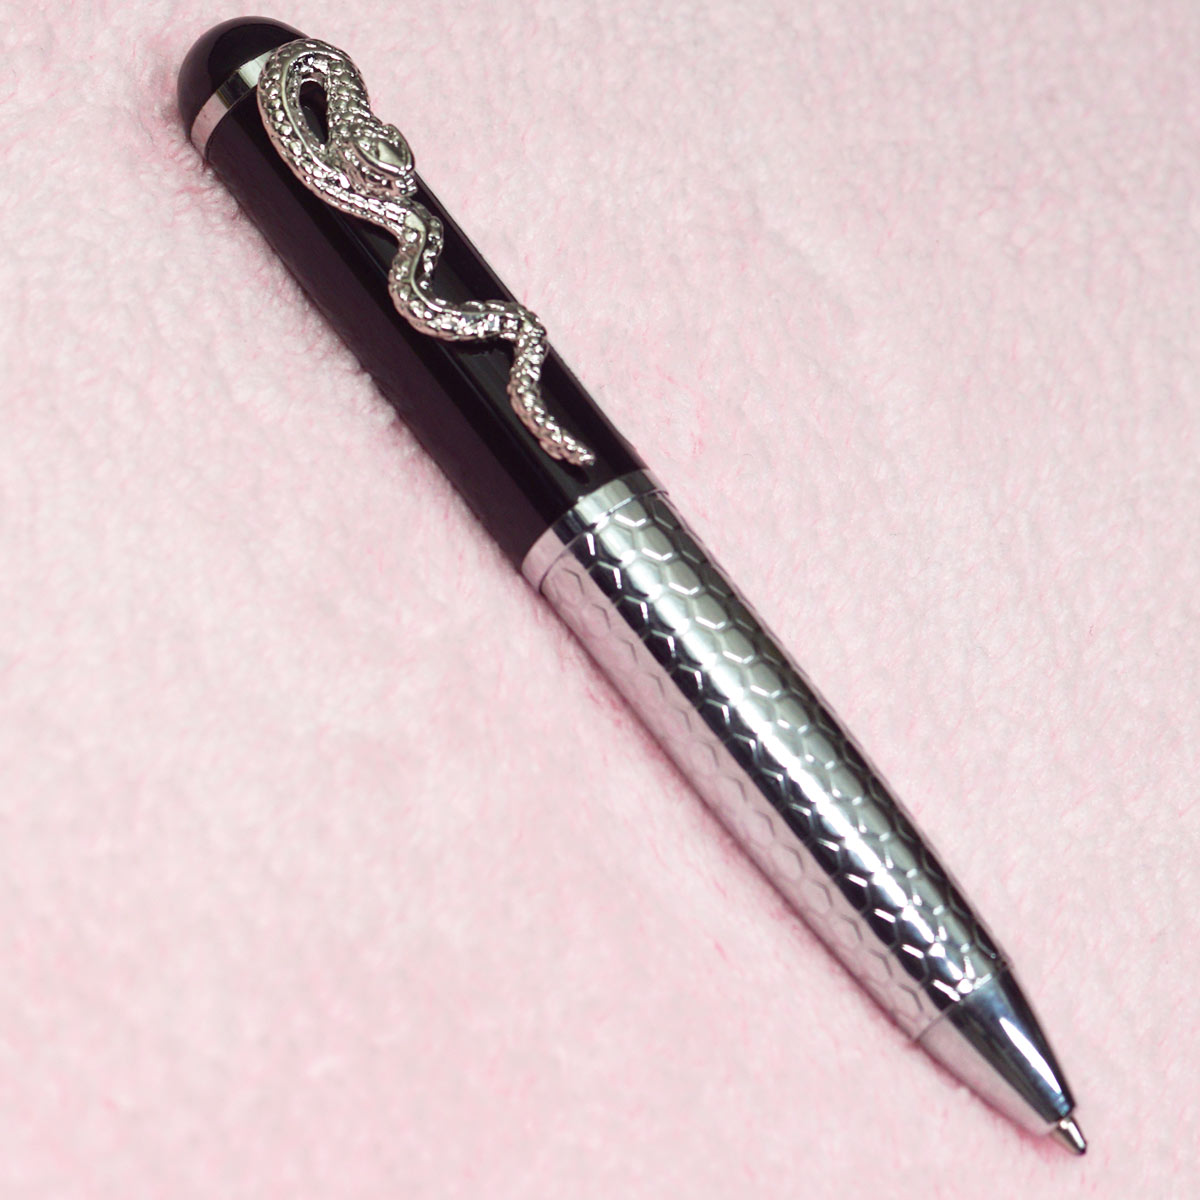 penhouse.in 5014 Mini Silver Color Body With Black Color Cap And Snake Clip Medium Tip Twist Type Ball Pen SKU 23337